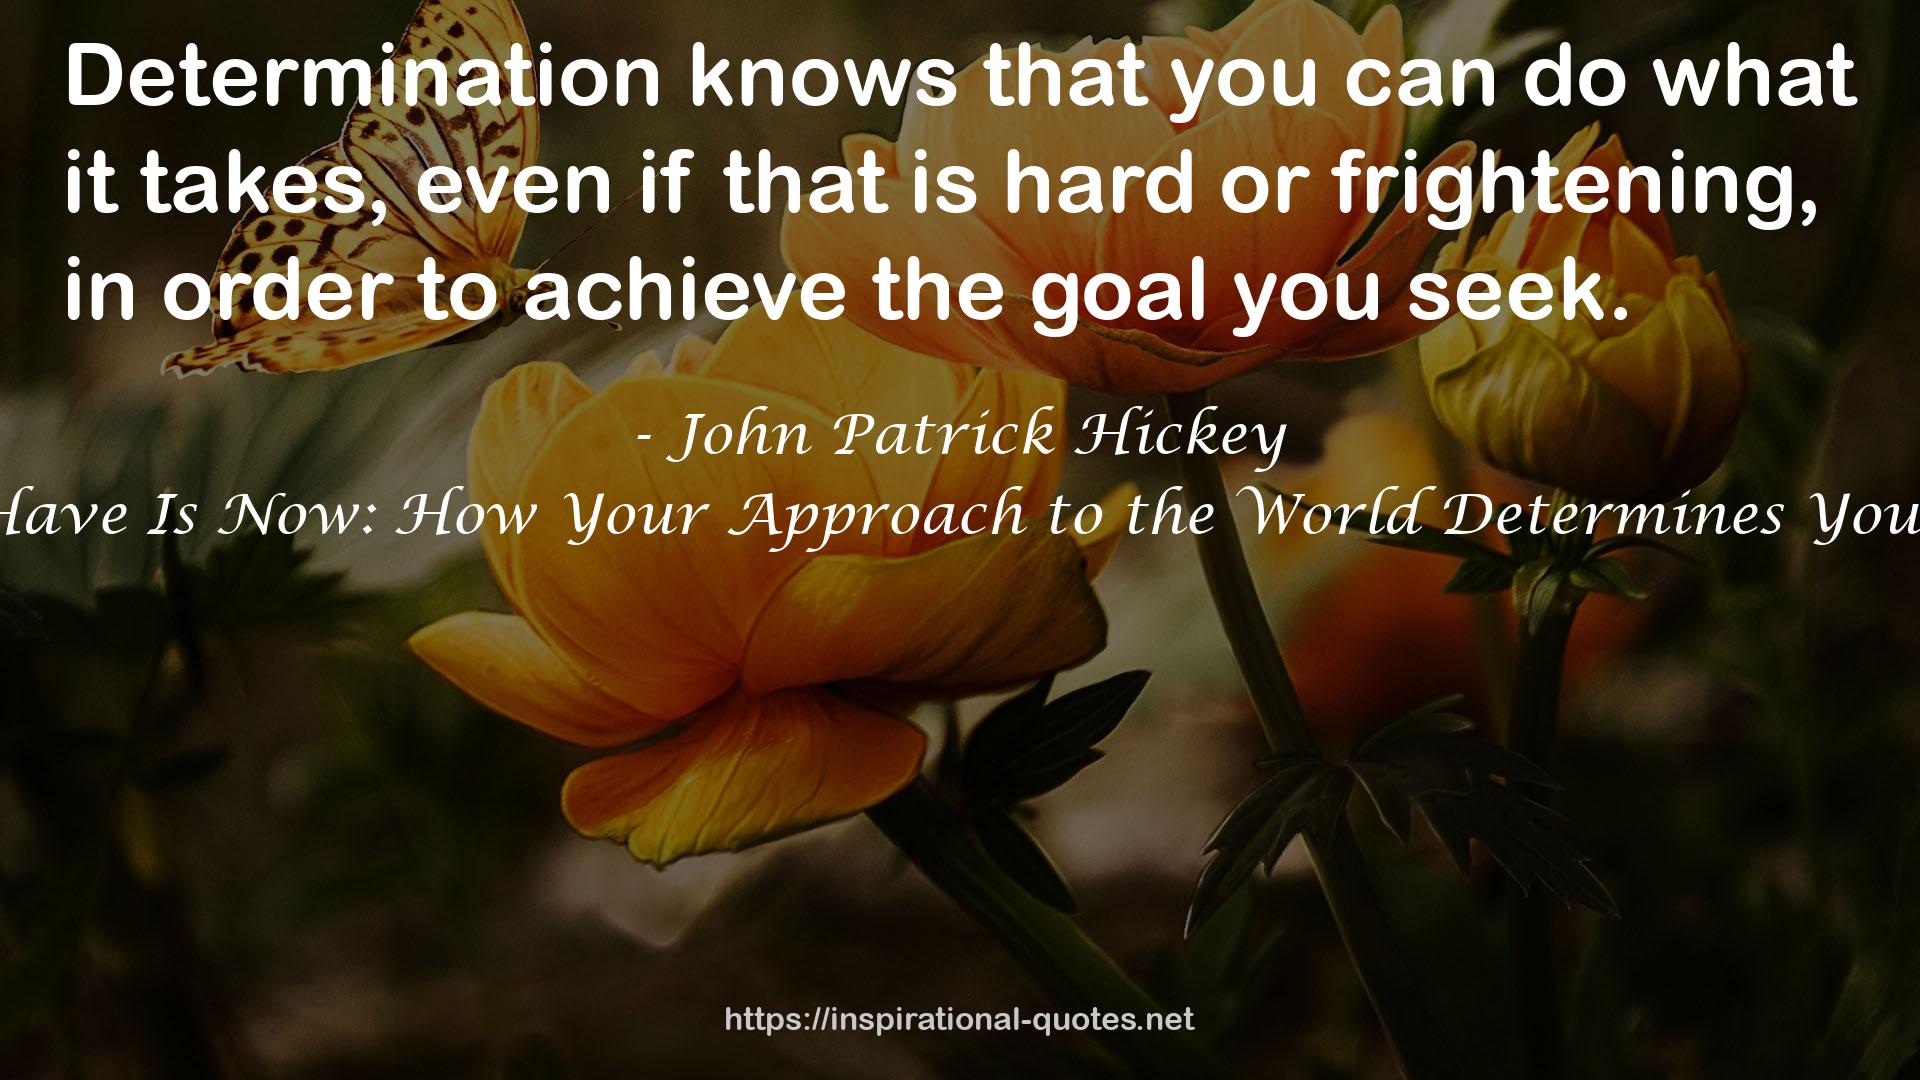 All You Have Is Now: How Your Approach to the World Determines Your Destiny QUOTES